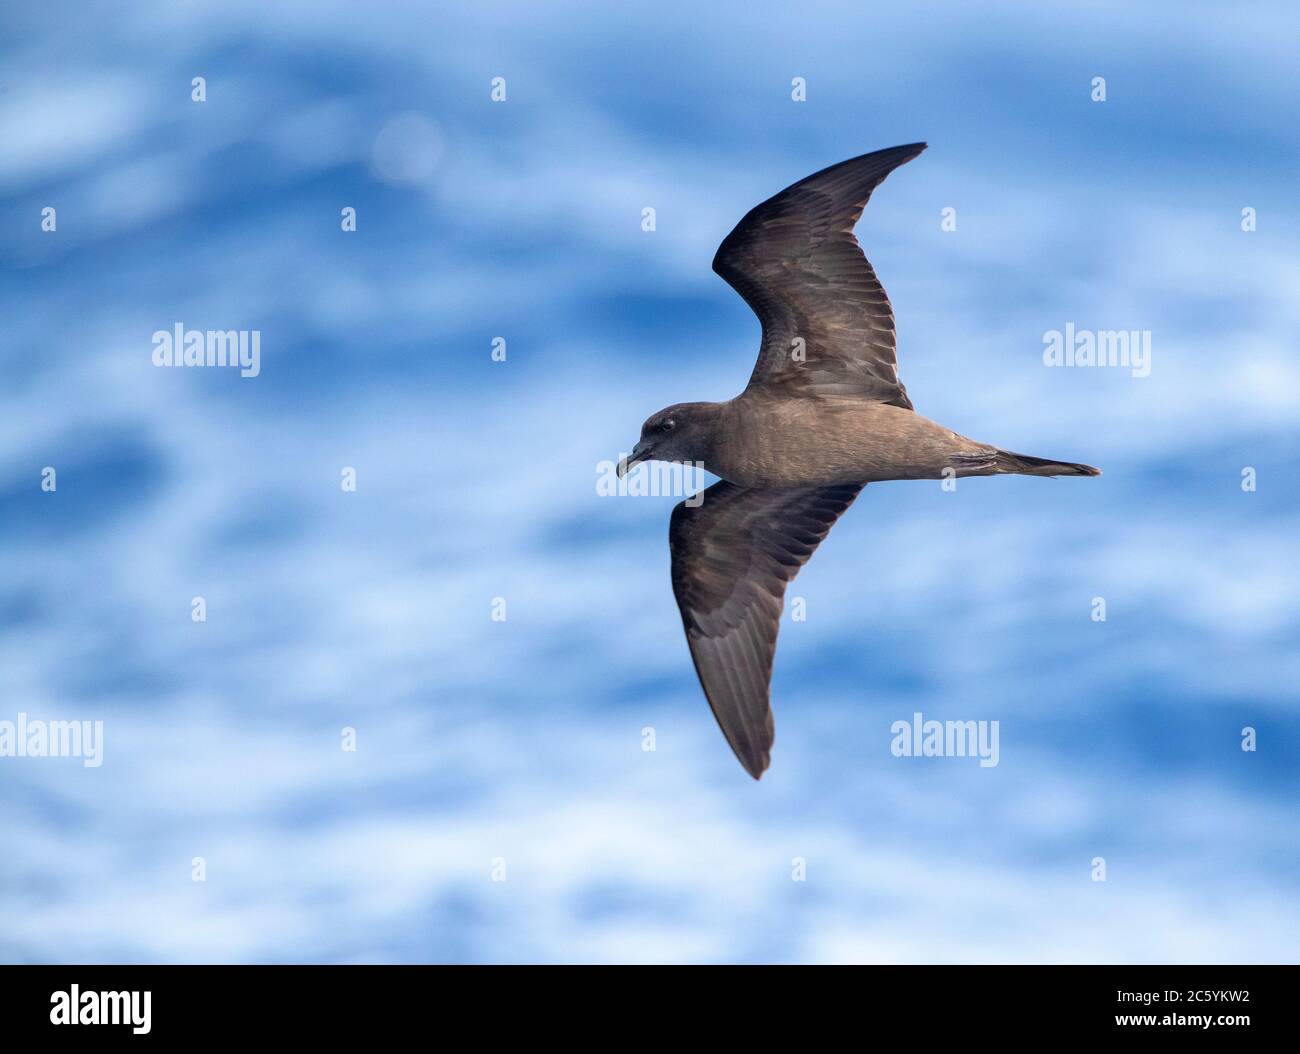 Bulwer's Petrel (Bulweria bulwerii) in flight over the Atlantic ocean off Madeira. Seen from the side, showing under wings. Stock Photo